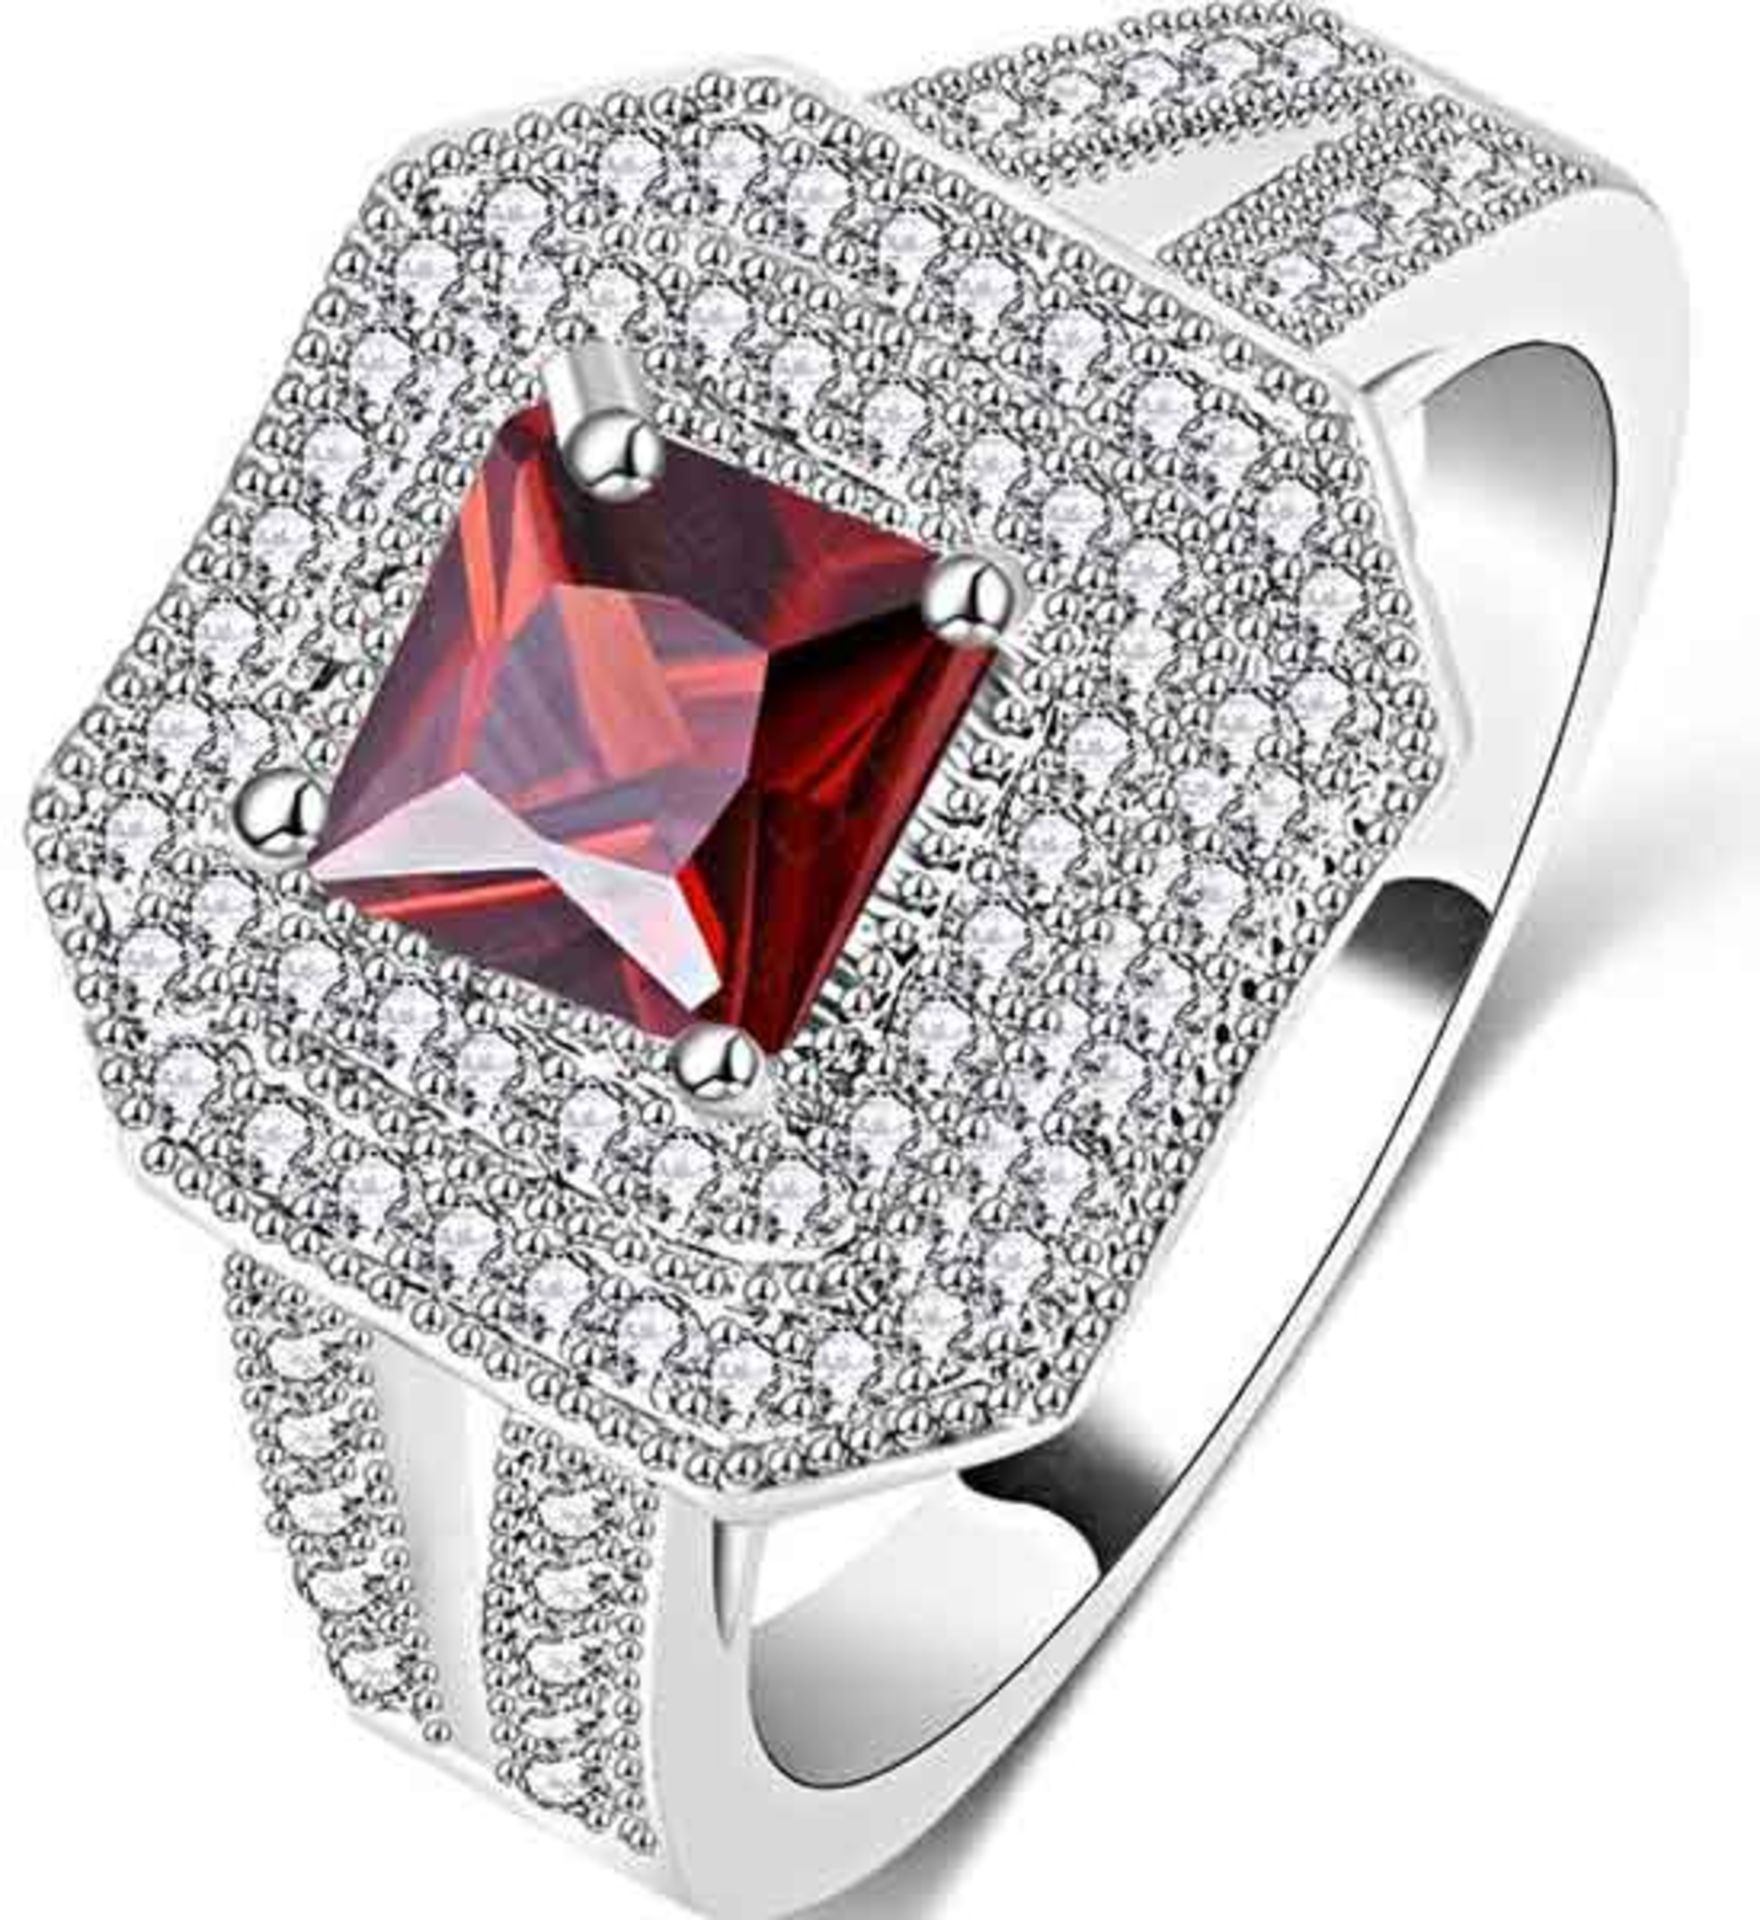 V Brand New Platinum Plated Square Ring with Large Red Stone